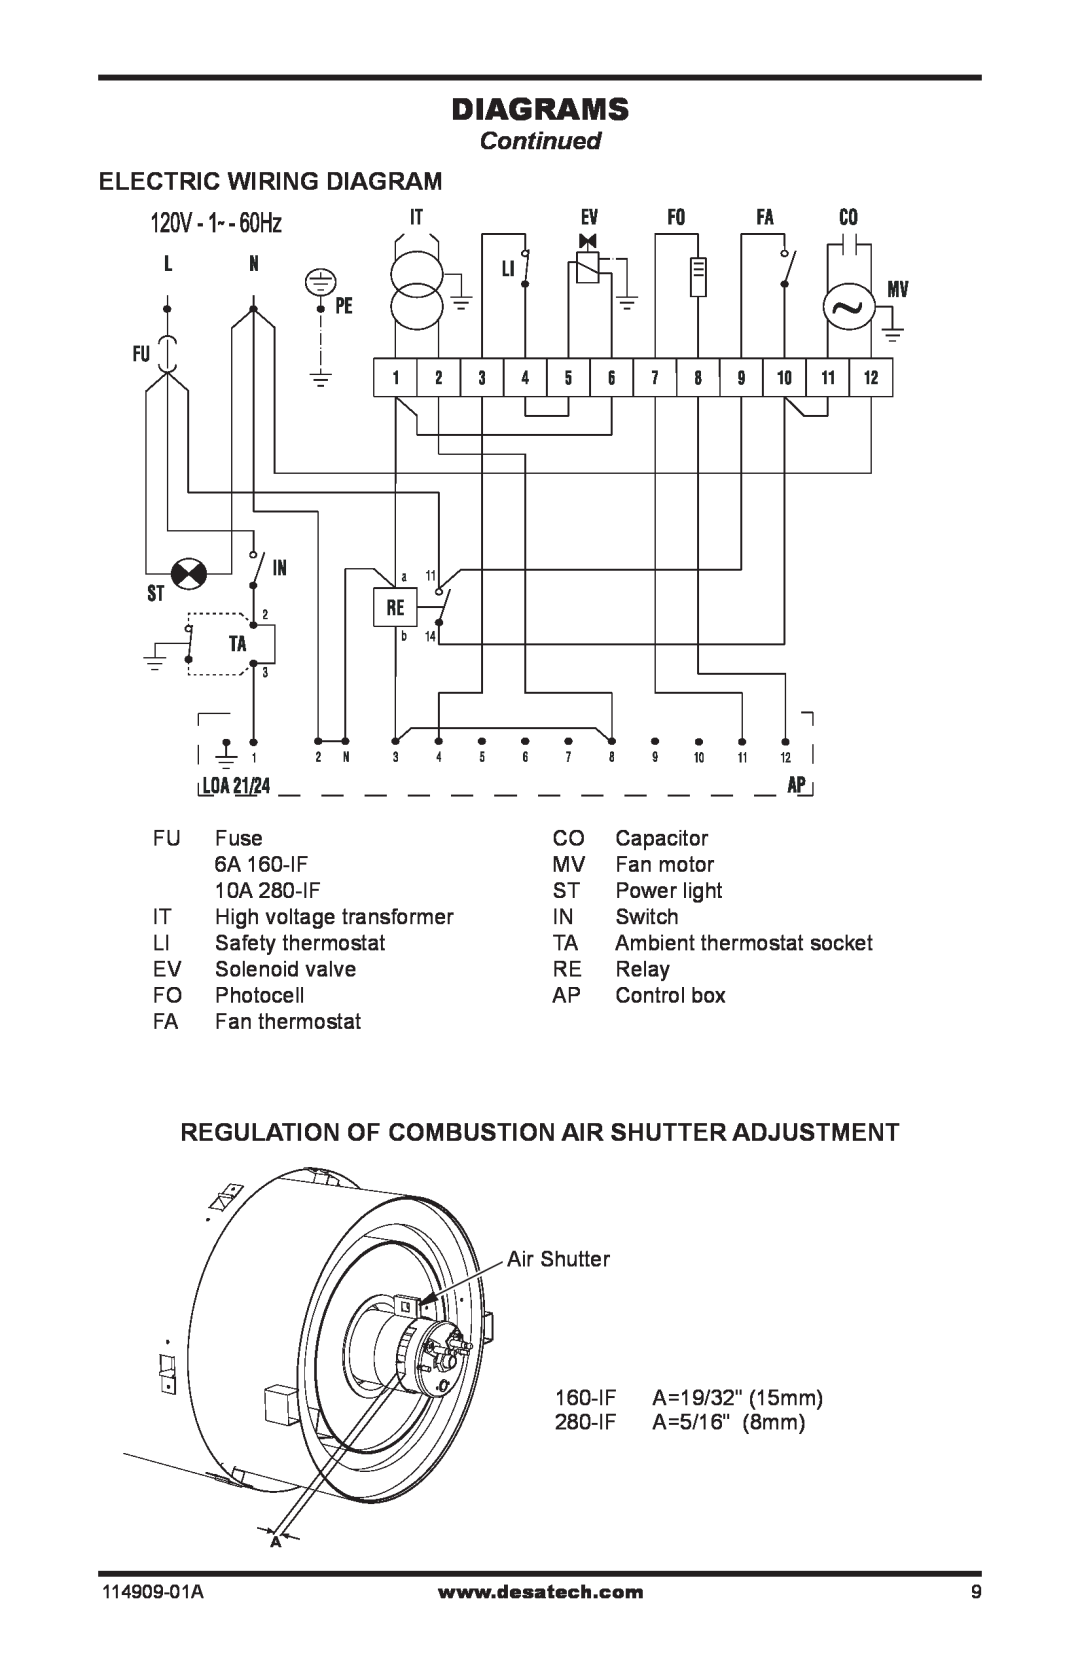 Desa 160-IF, 280-IF Diagrams, Continued, Electric Wiring Diagram, Regulation Of Combustion Air Shutter Adjustment 